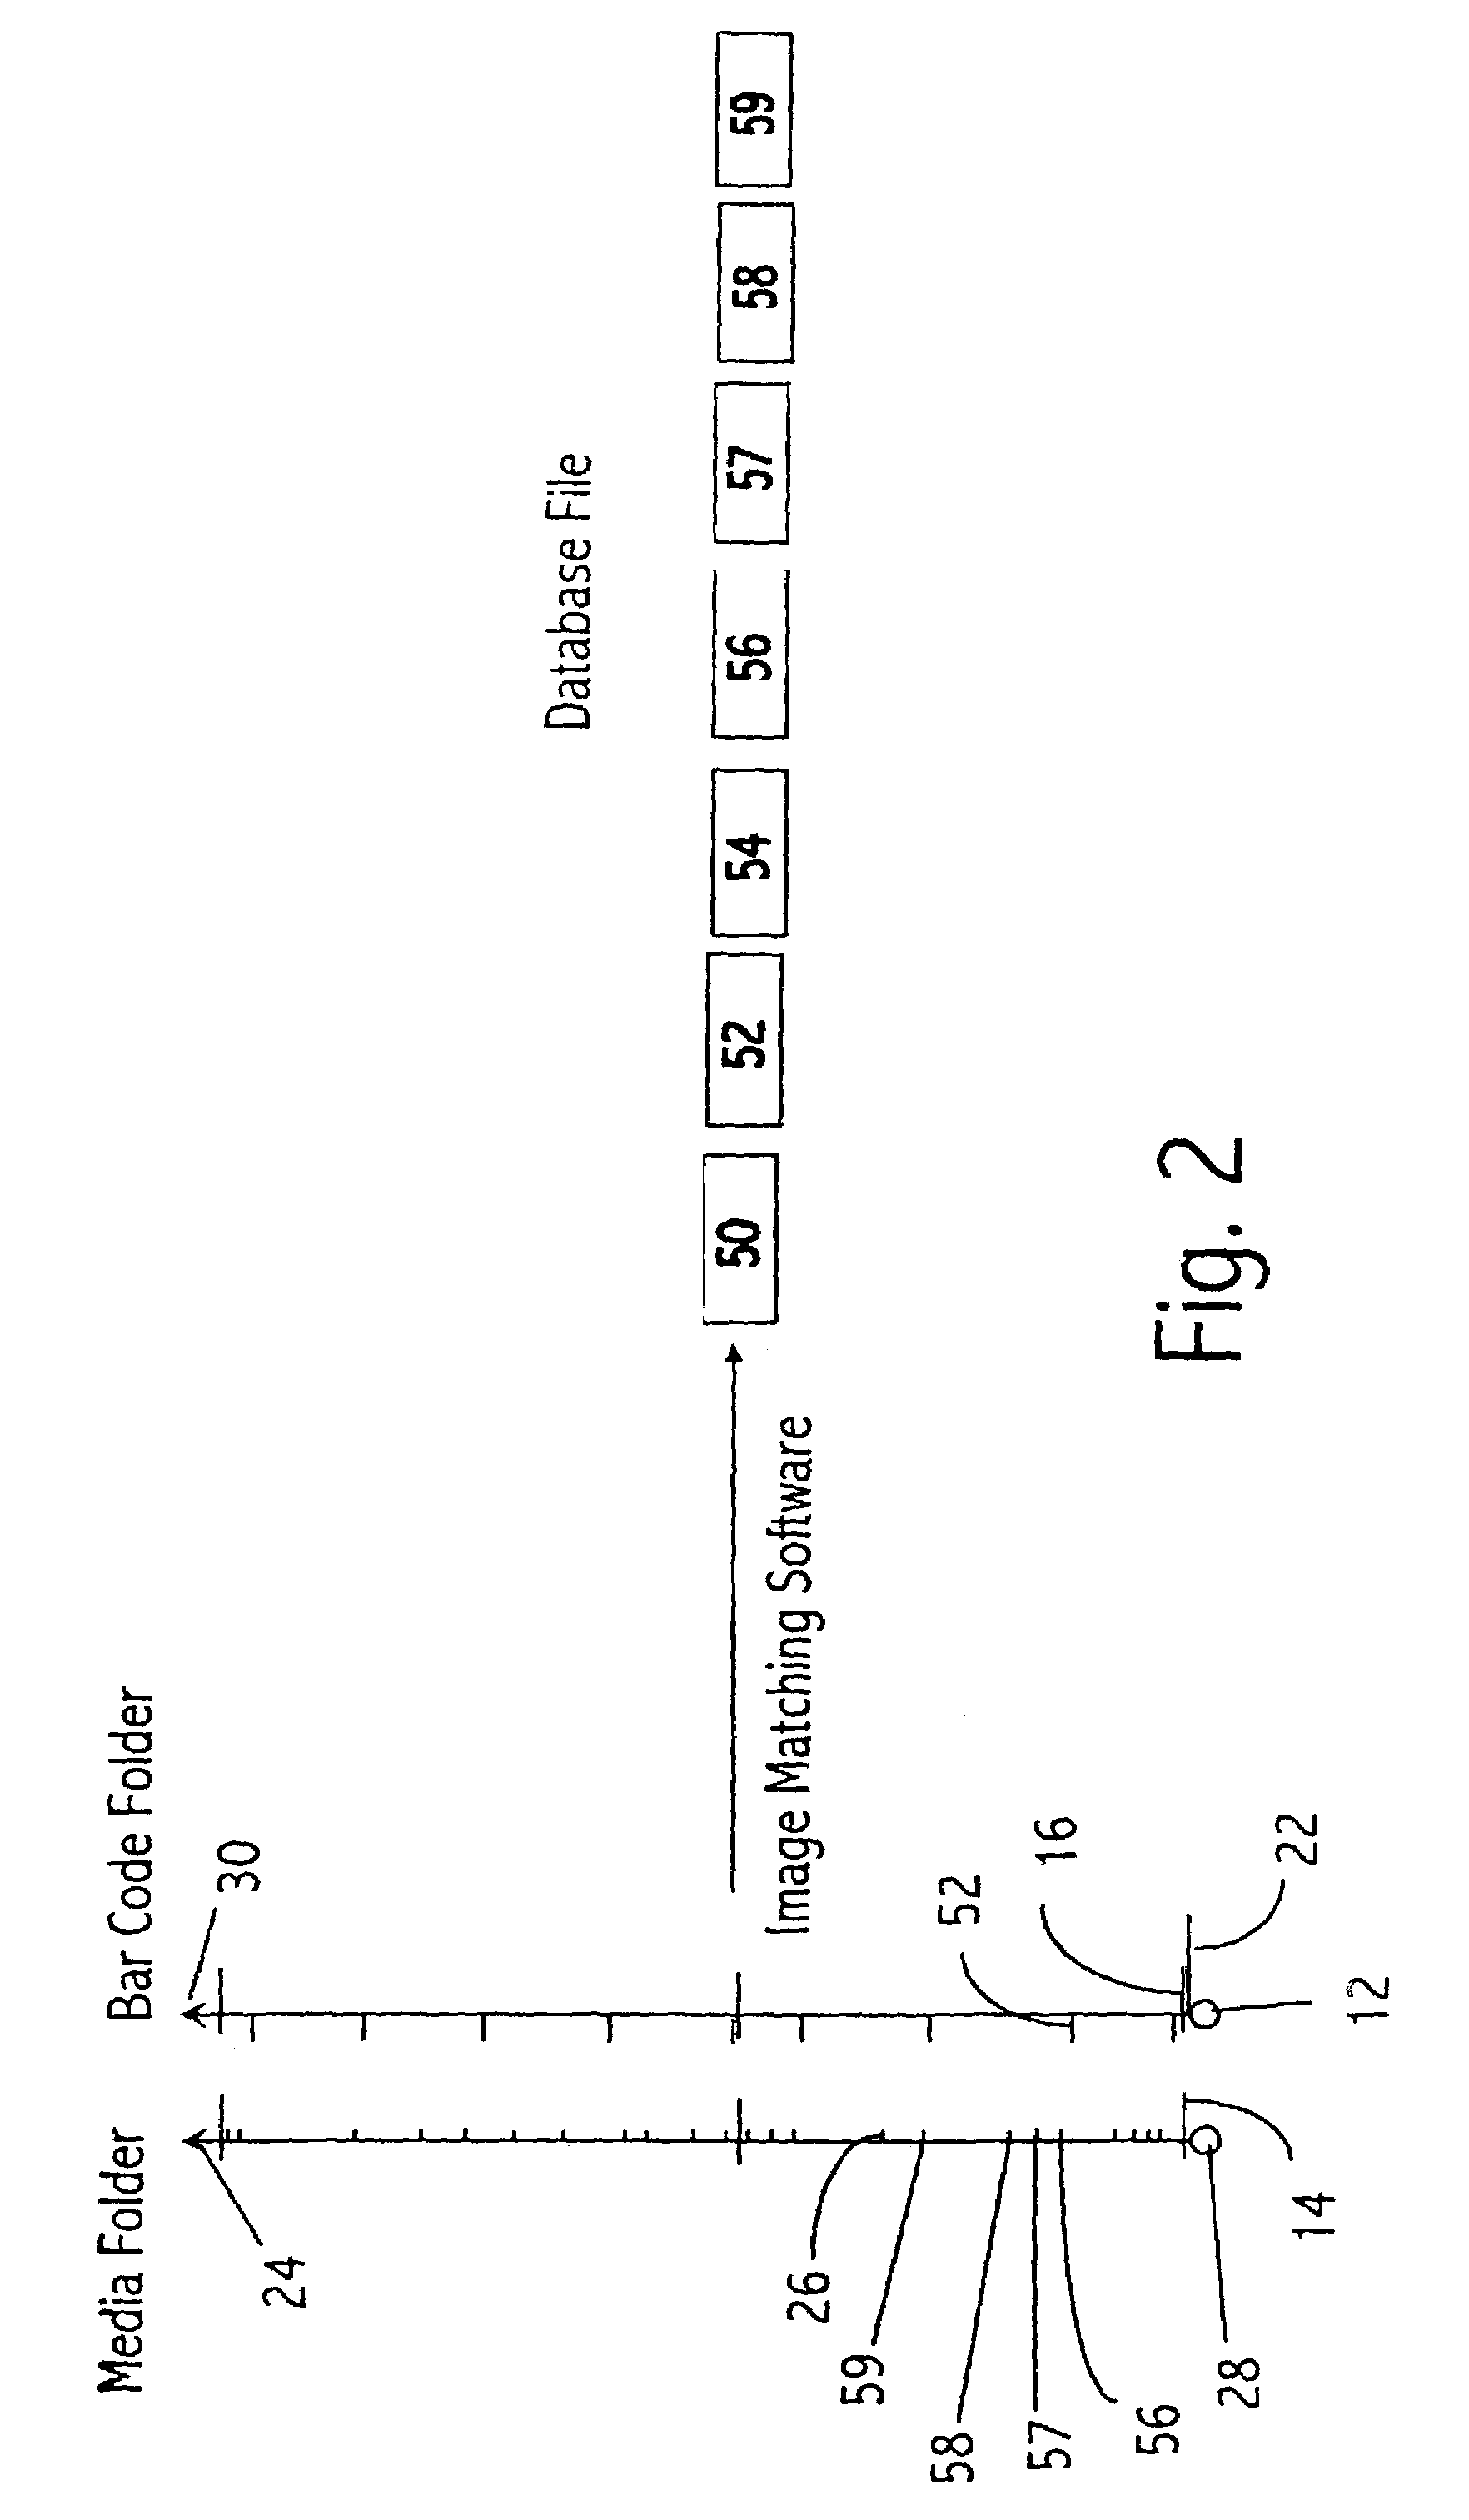 Method of matching a digital camera image to a database using a timestamp device